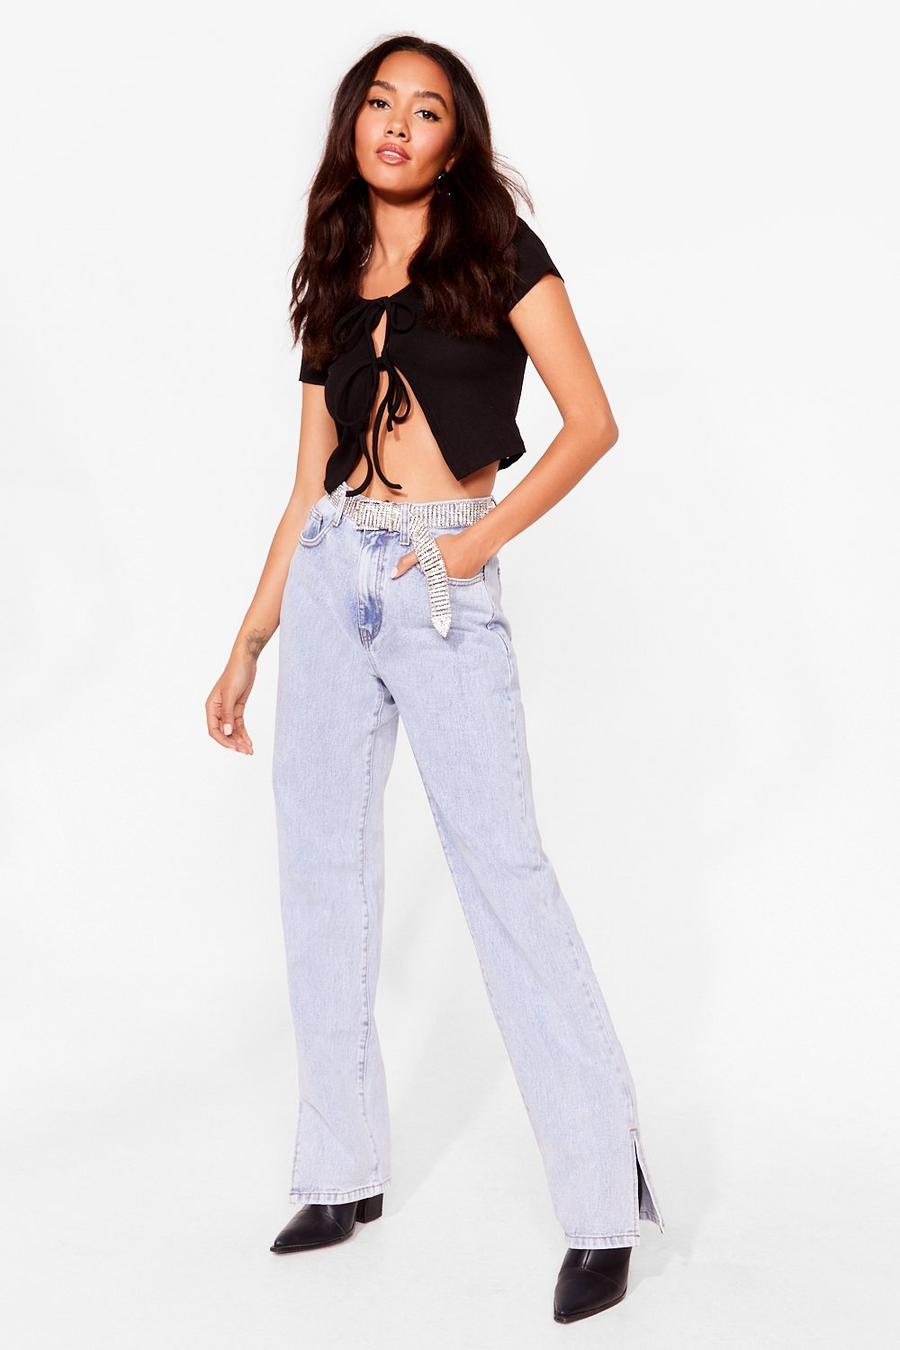 Slit's Now or Never Petite High-Waisted Jeans